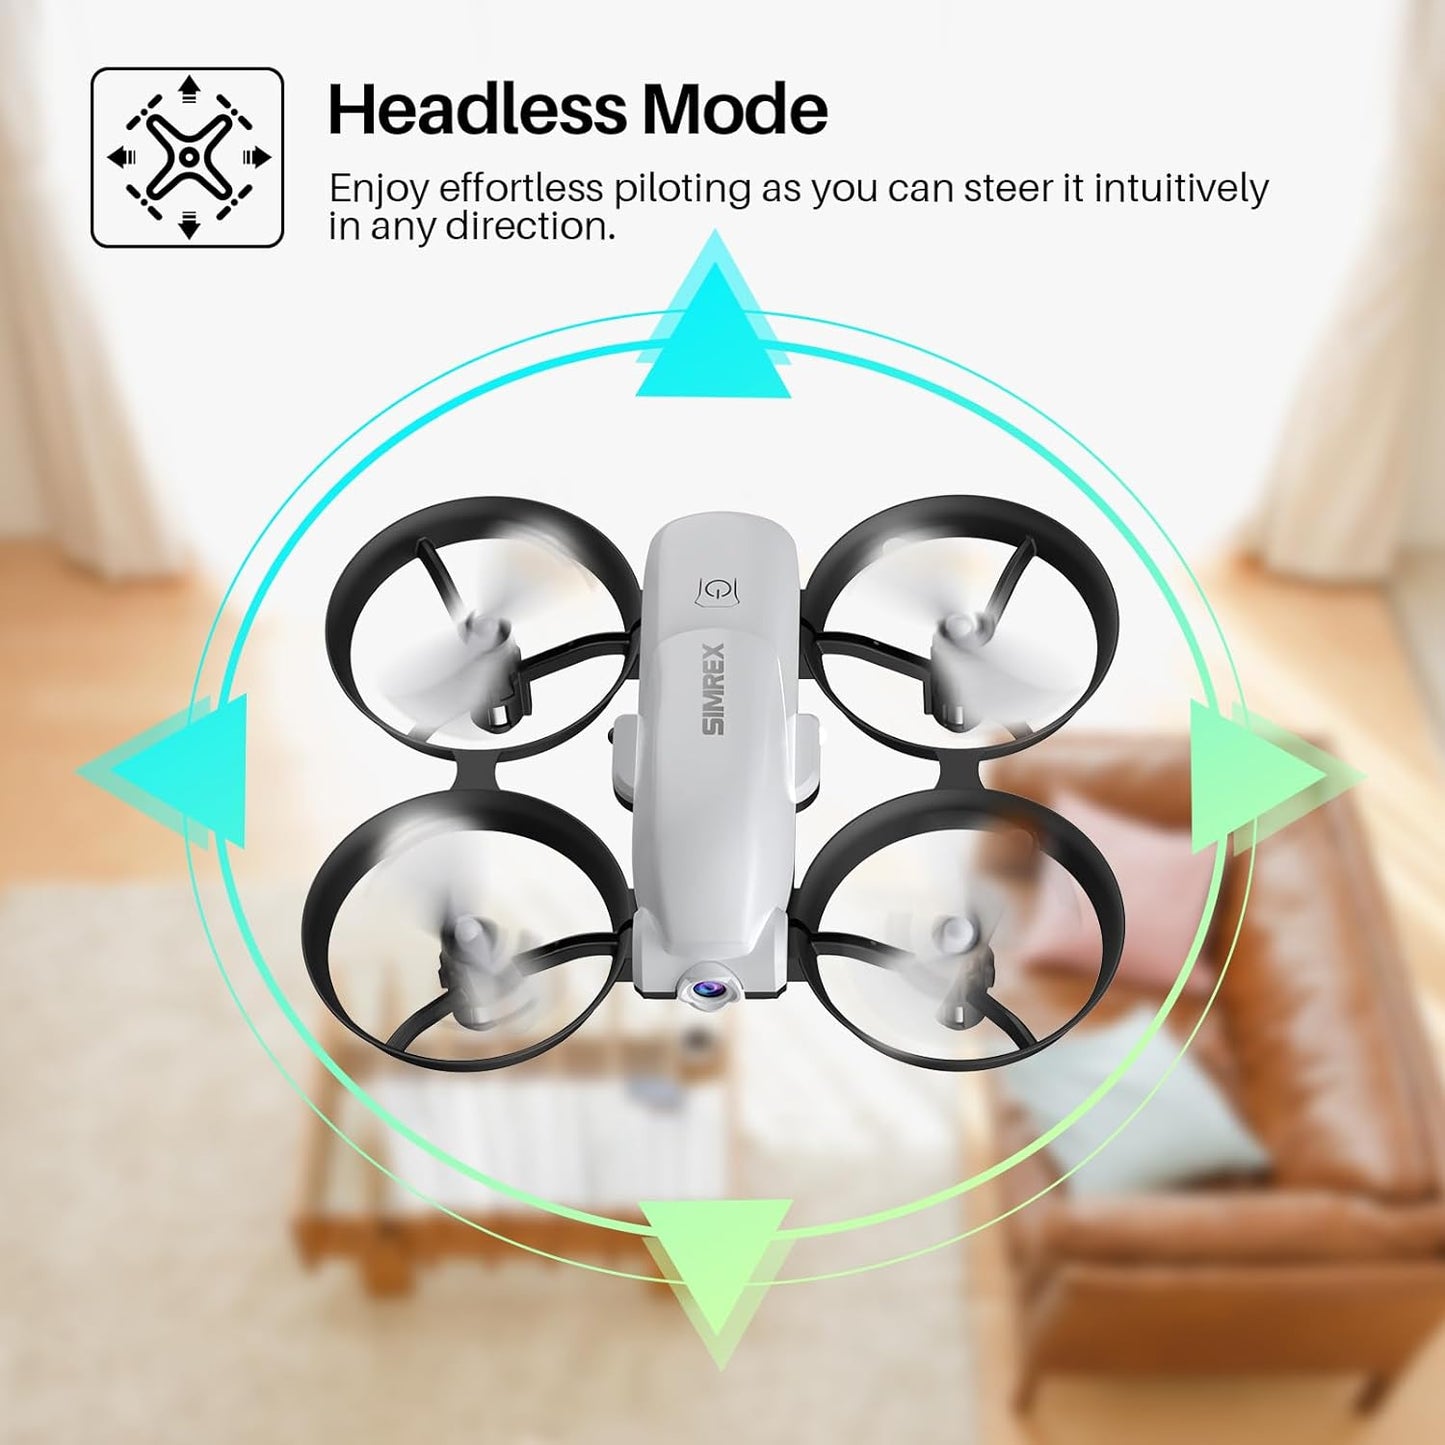 SIMREX X700 Drone, Jo 1 is a headless mode that allows you to steer it